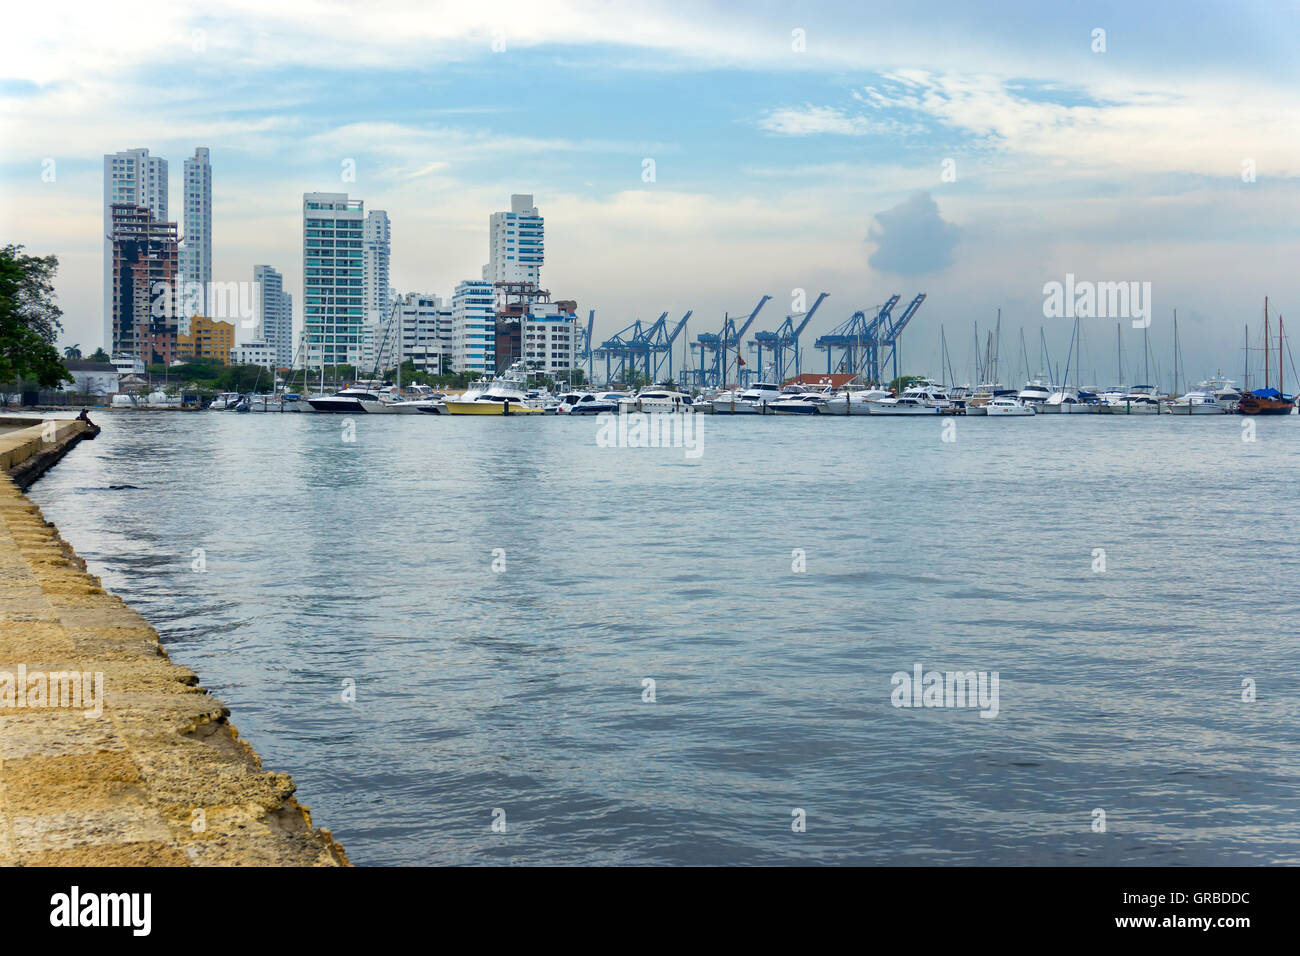 View of yachts and skyscrapers on the waterfront of Cartagena, Colombia Stock Photo